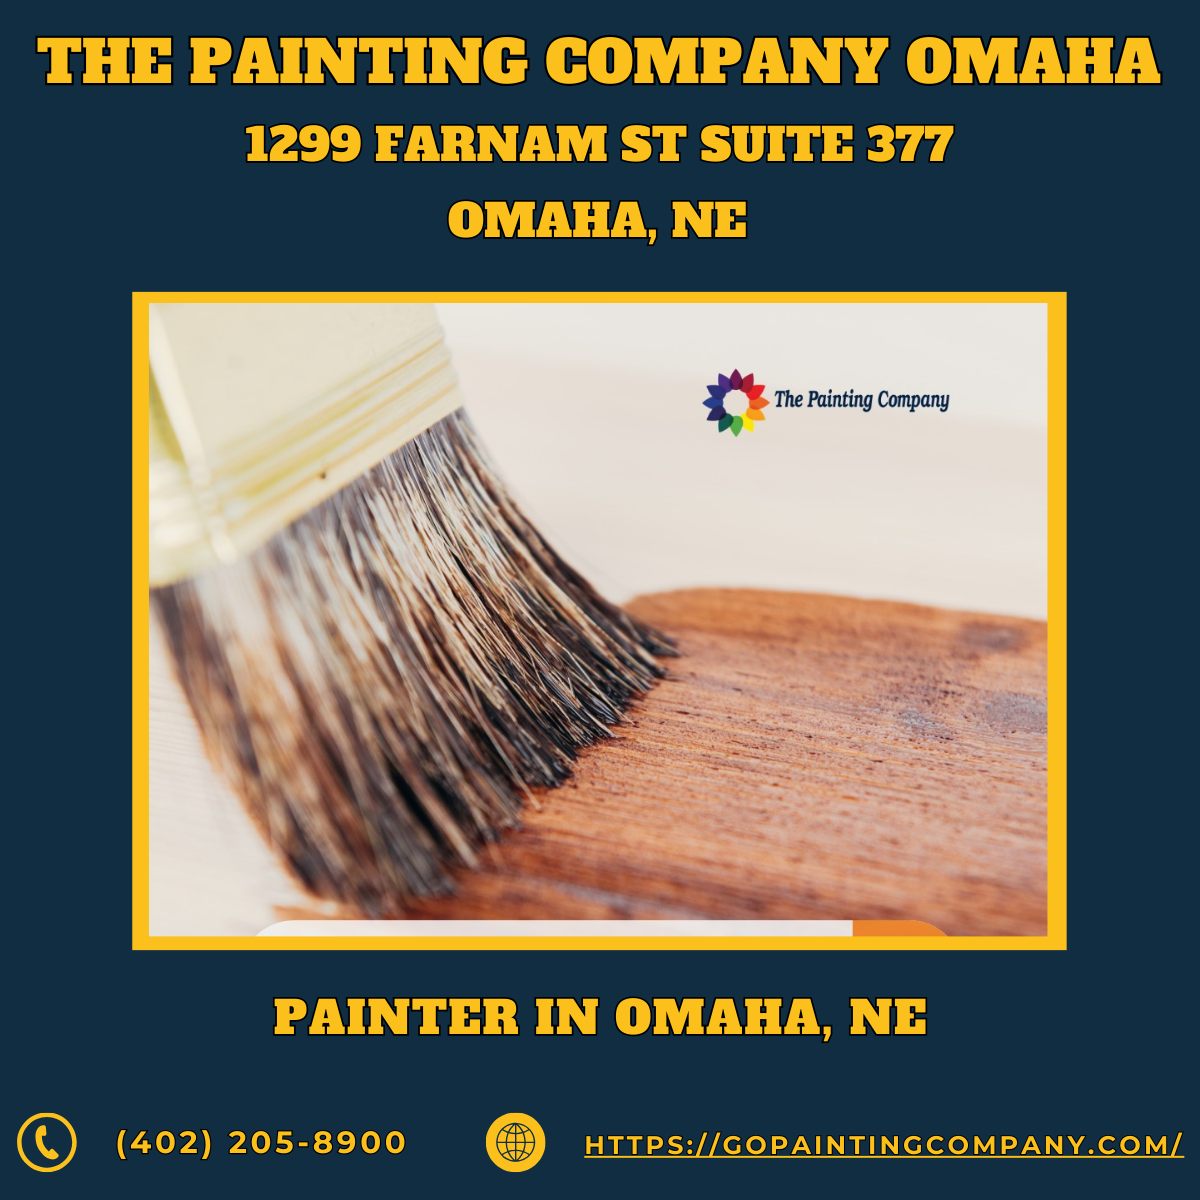 The Painting Company Confirmed as the Premier Painter in Omaha, NE, Boasting Unmatched Customer Service and Satisfaction